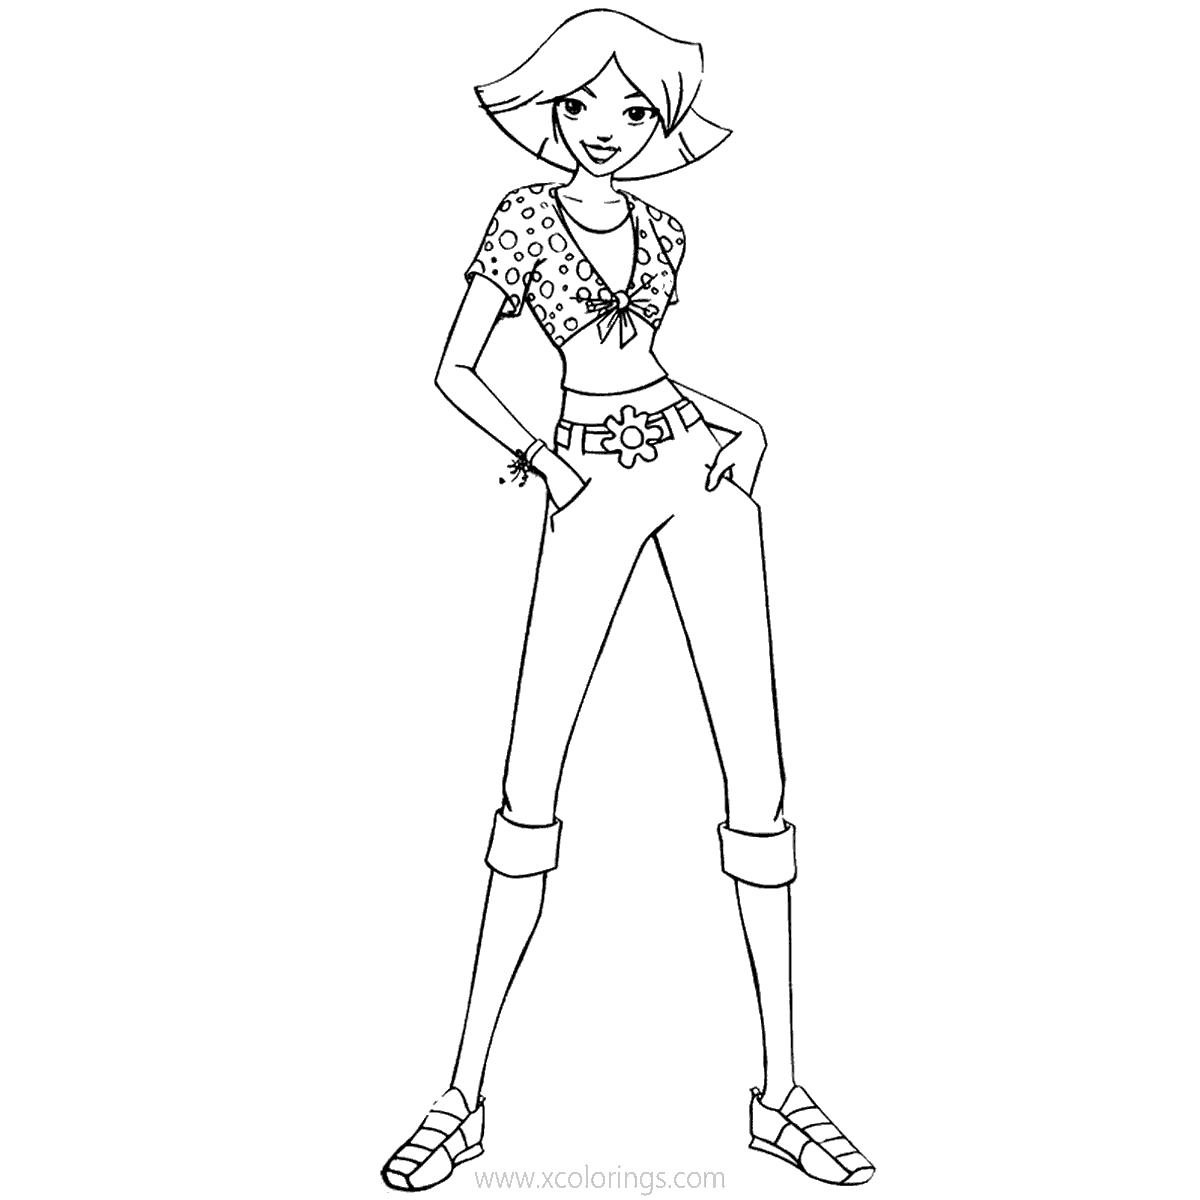 Free Totally Spies Coloring Pages Character Clover printable